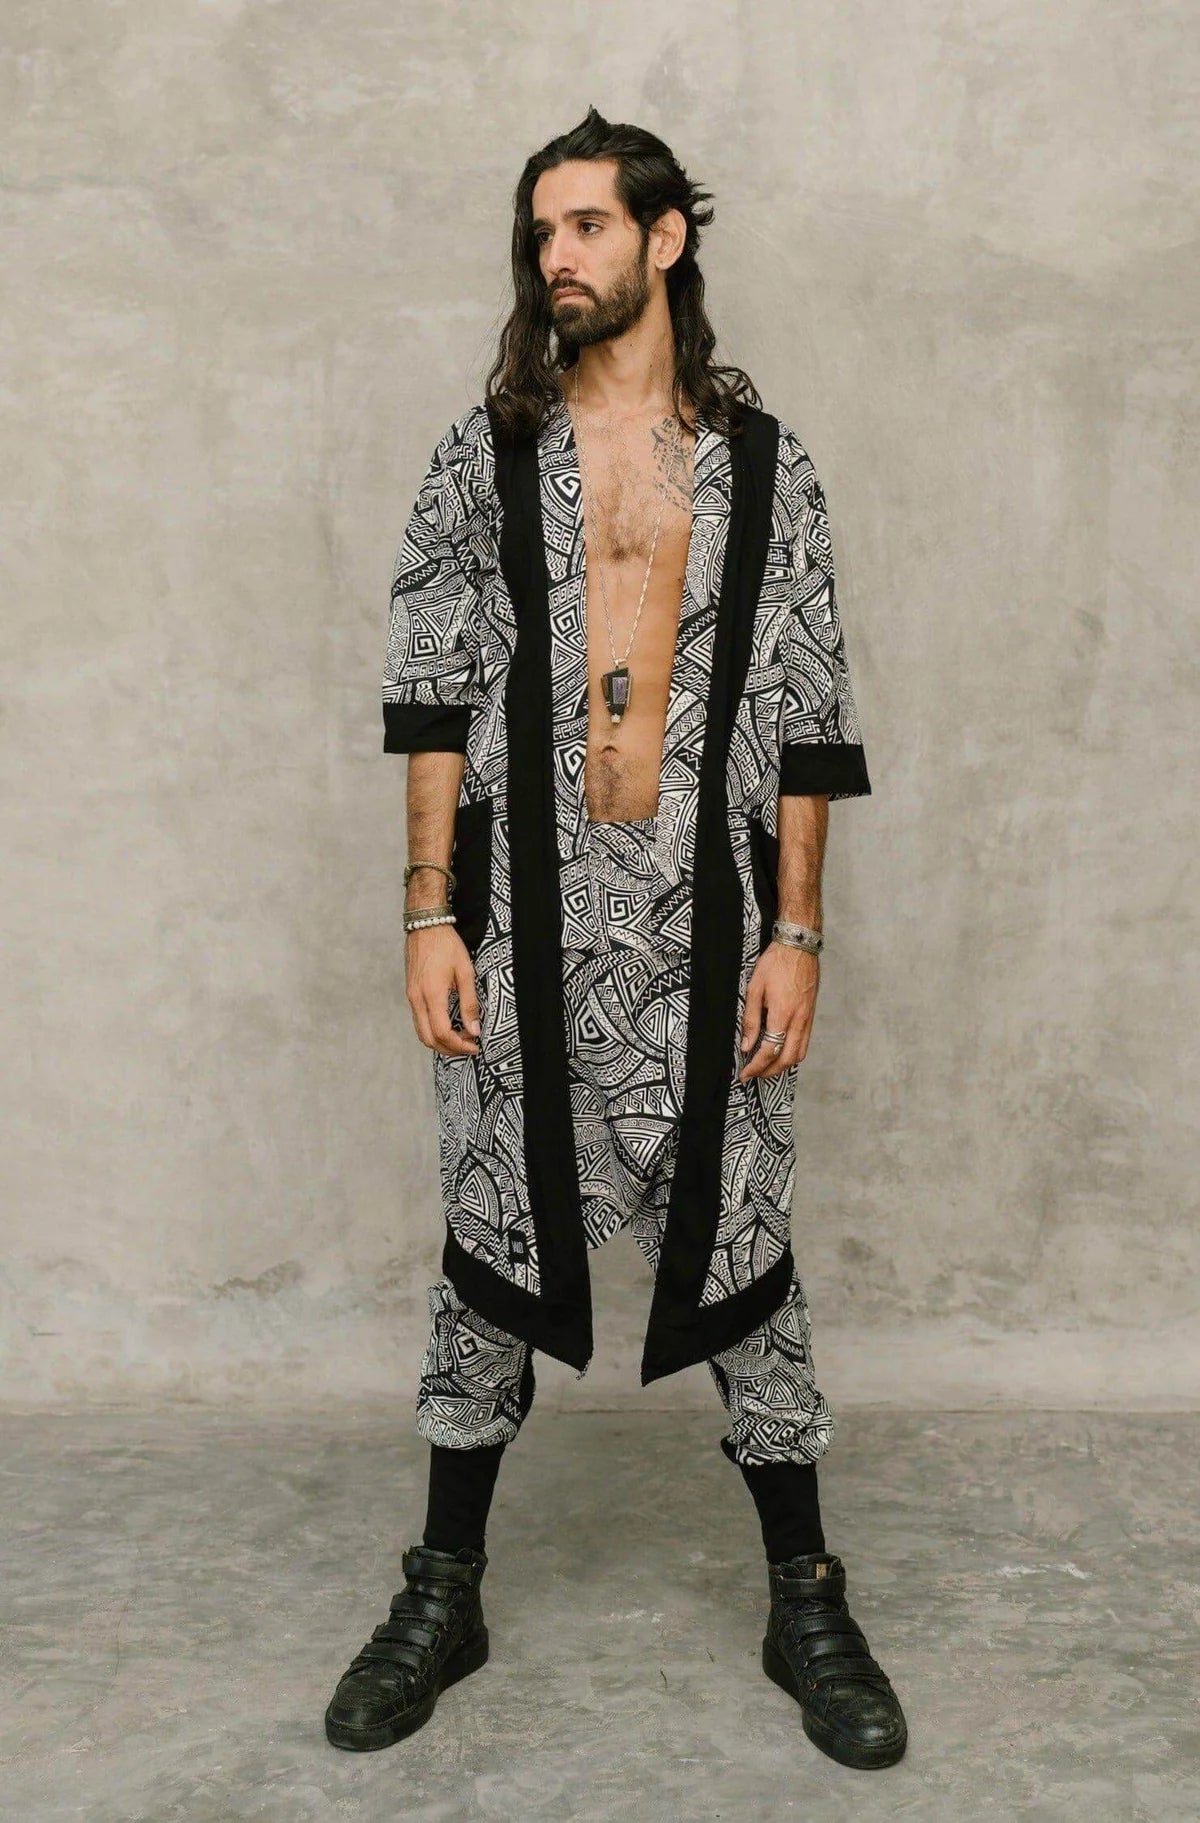 Valo Spirit Outfit Black and White Tribal